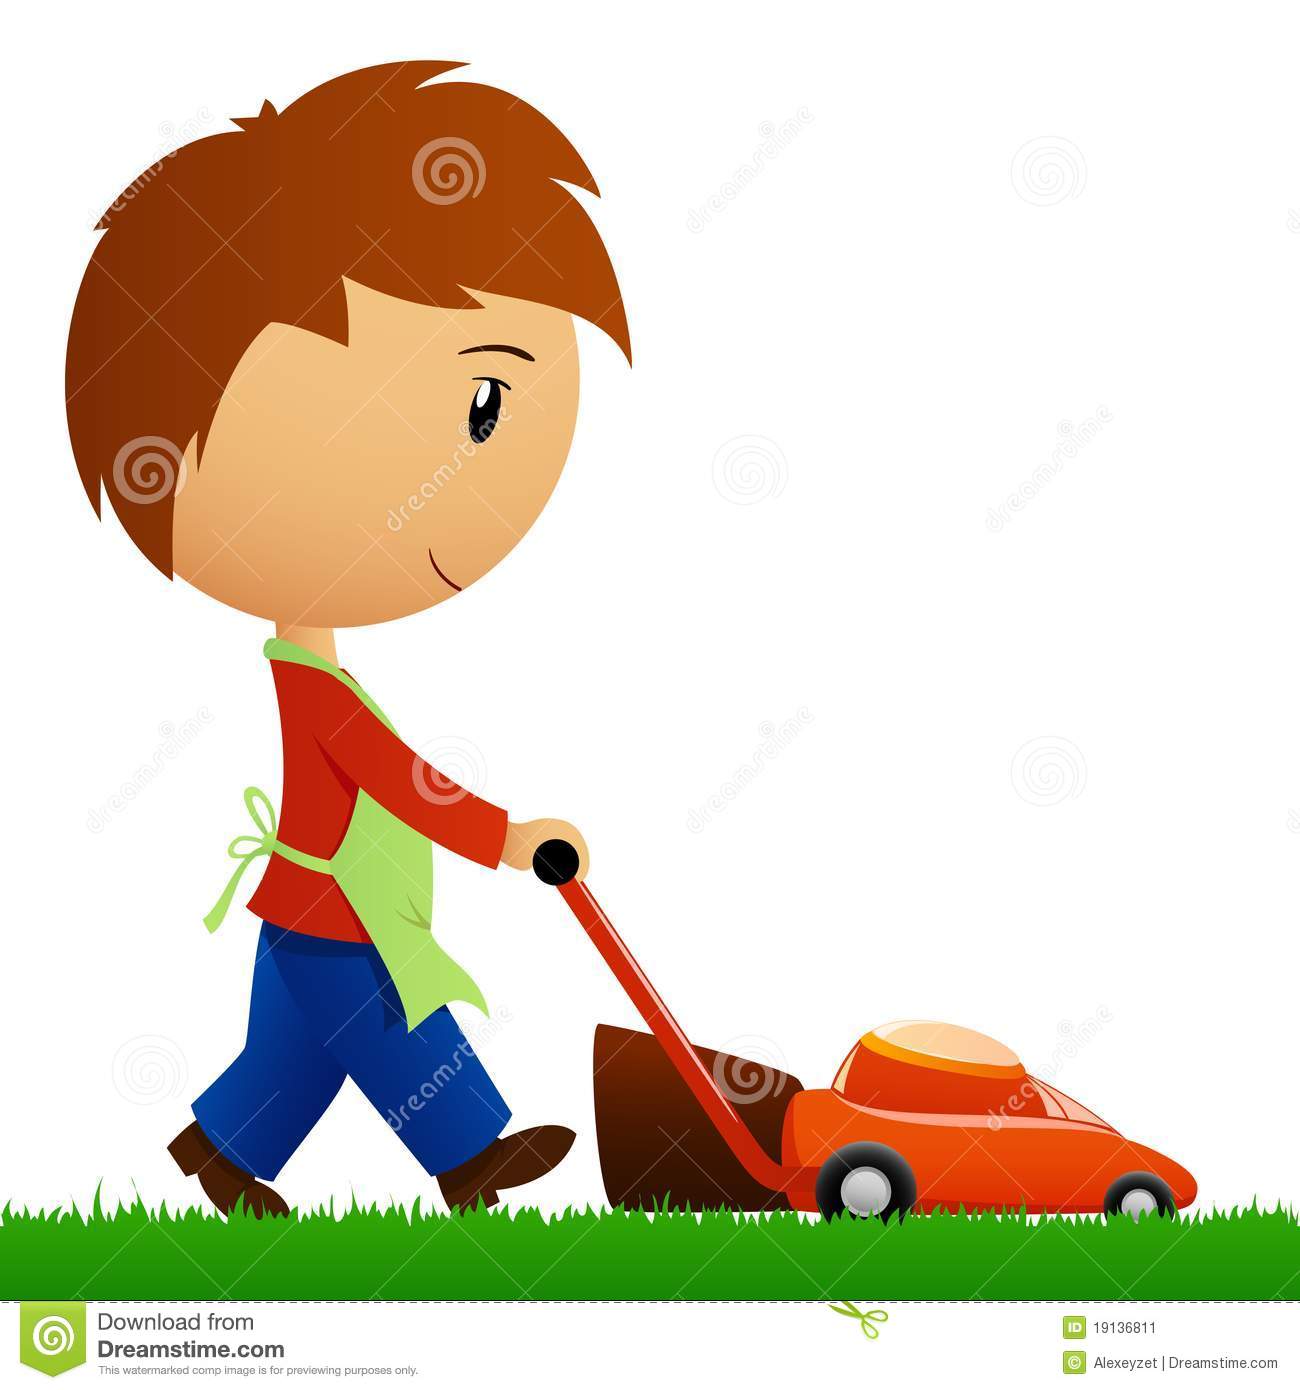 Man Cutting The Grass With Lawn Mower Stock Image   Image  19136811